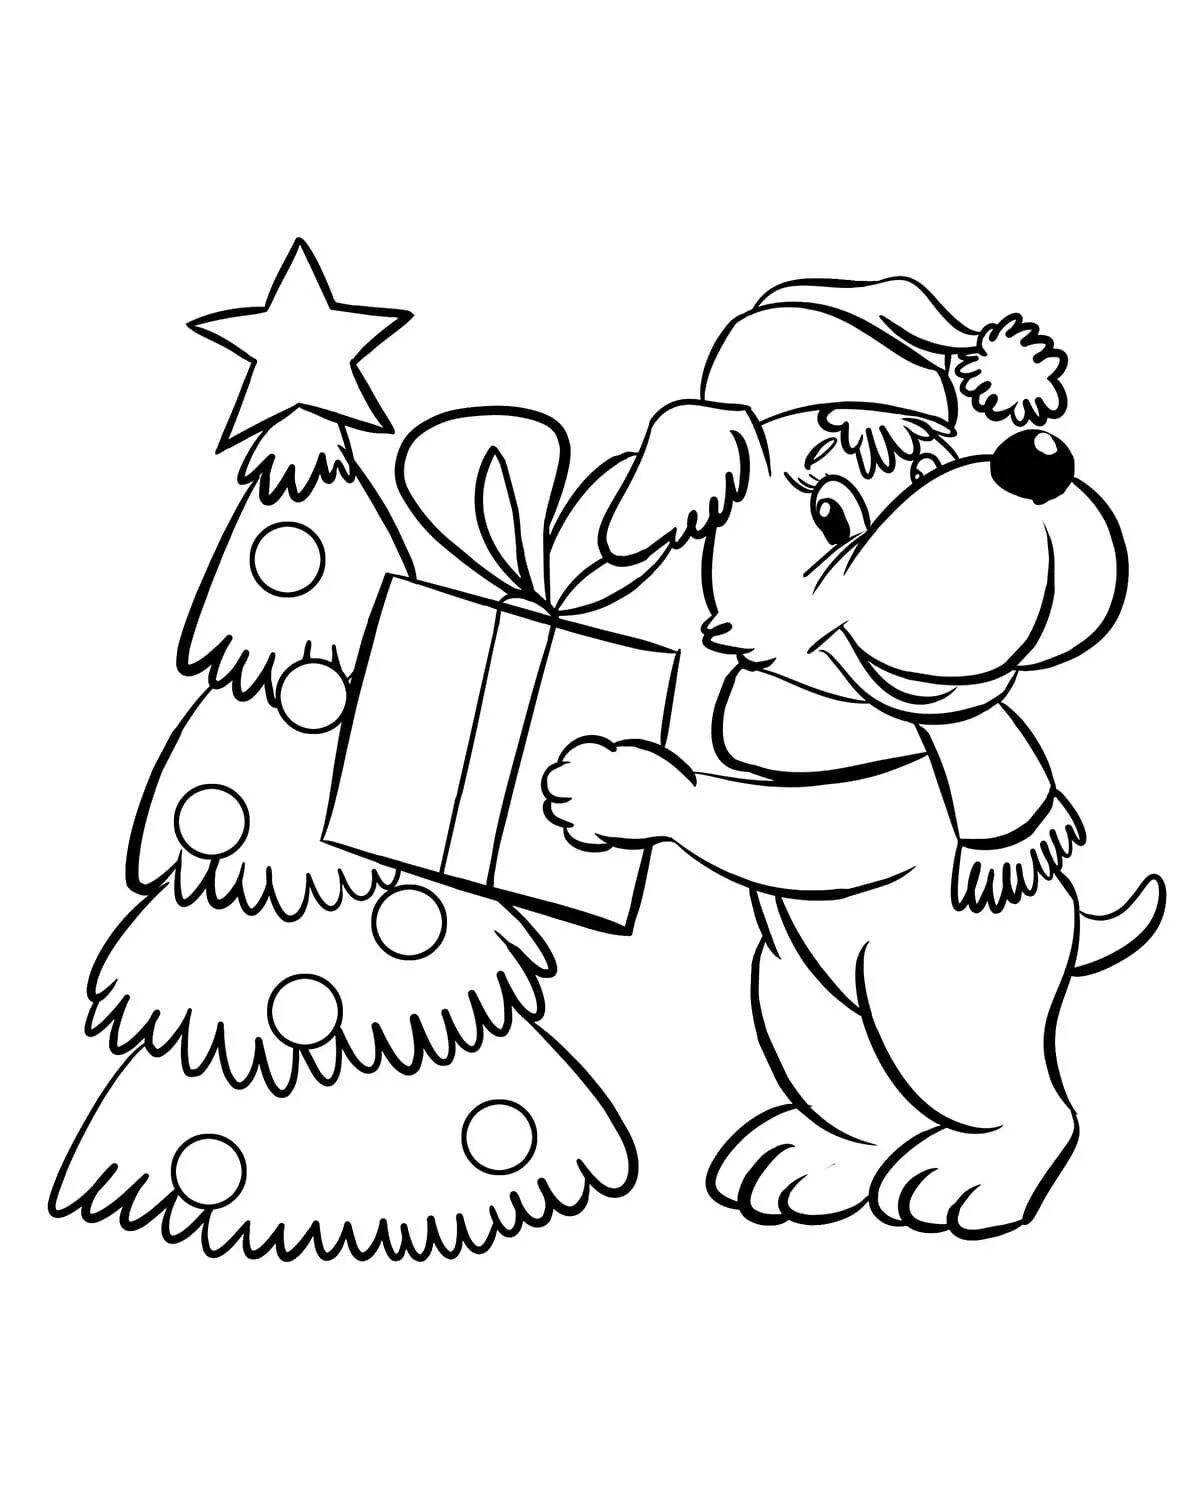 Colorful Christmas dog coloring book